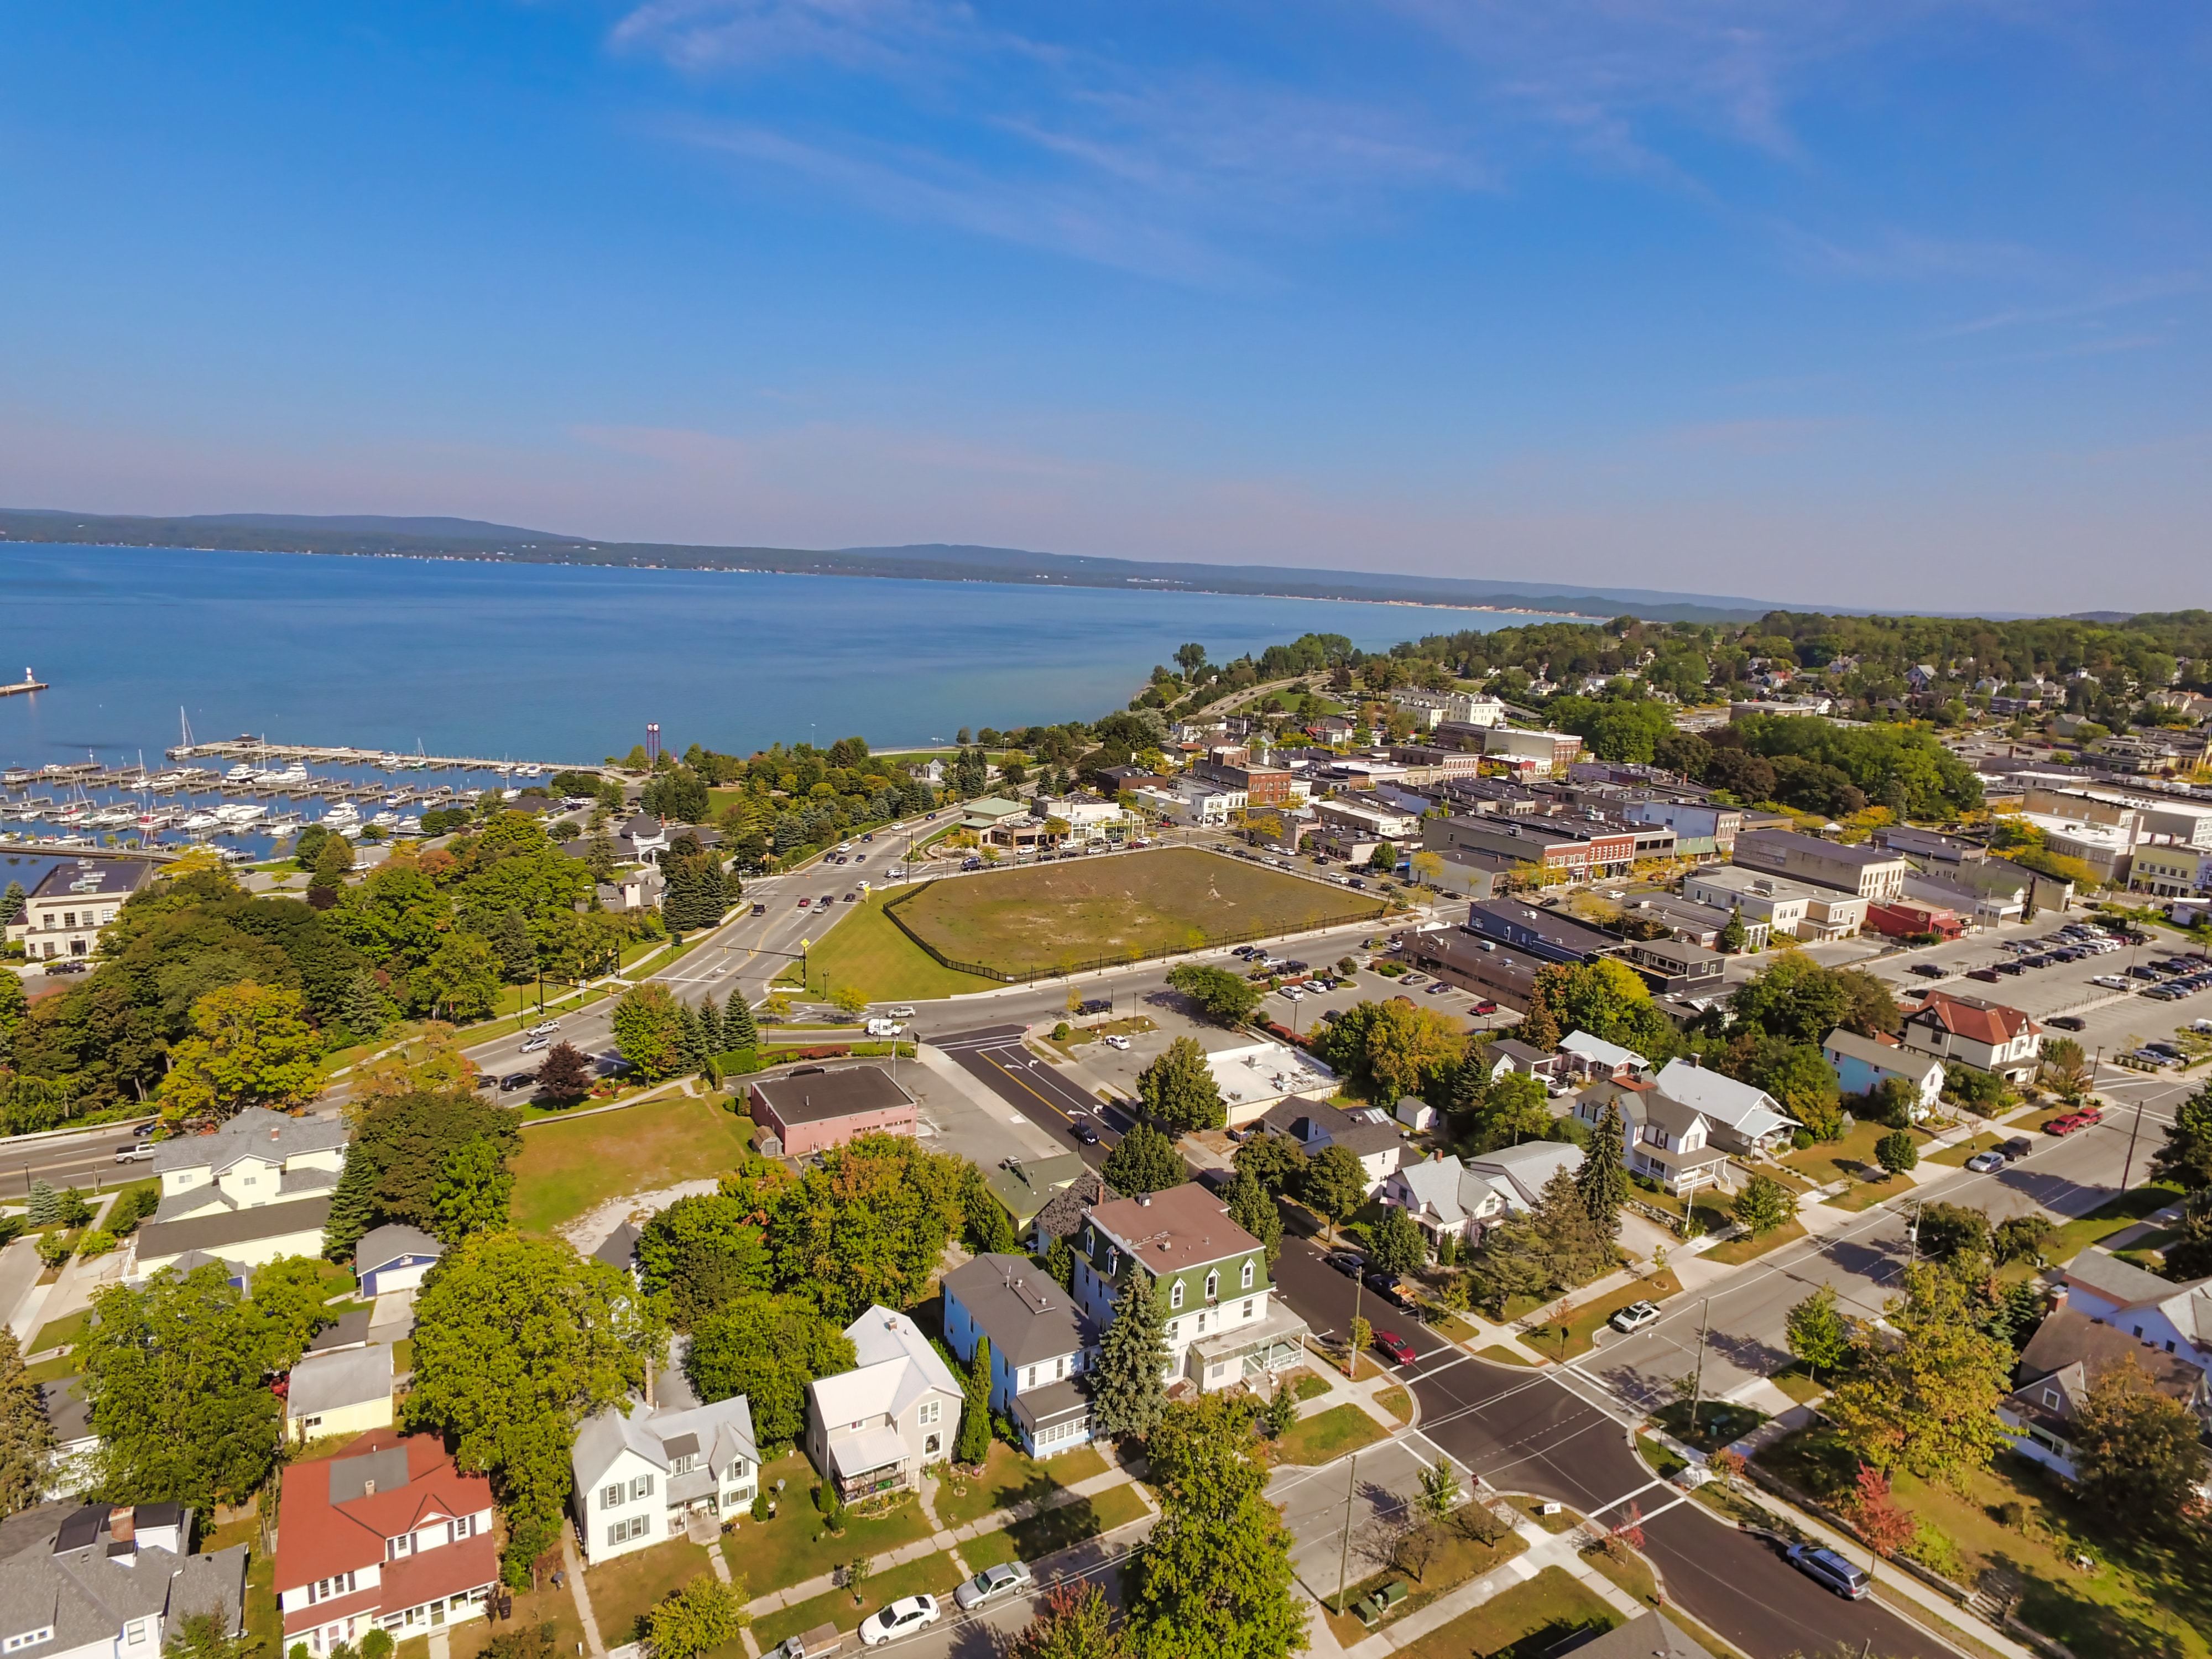 A lakeside condominium complex in Petoskey with modern design and lush surroundings.